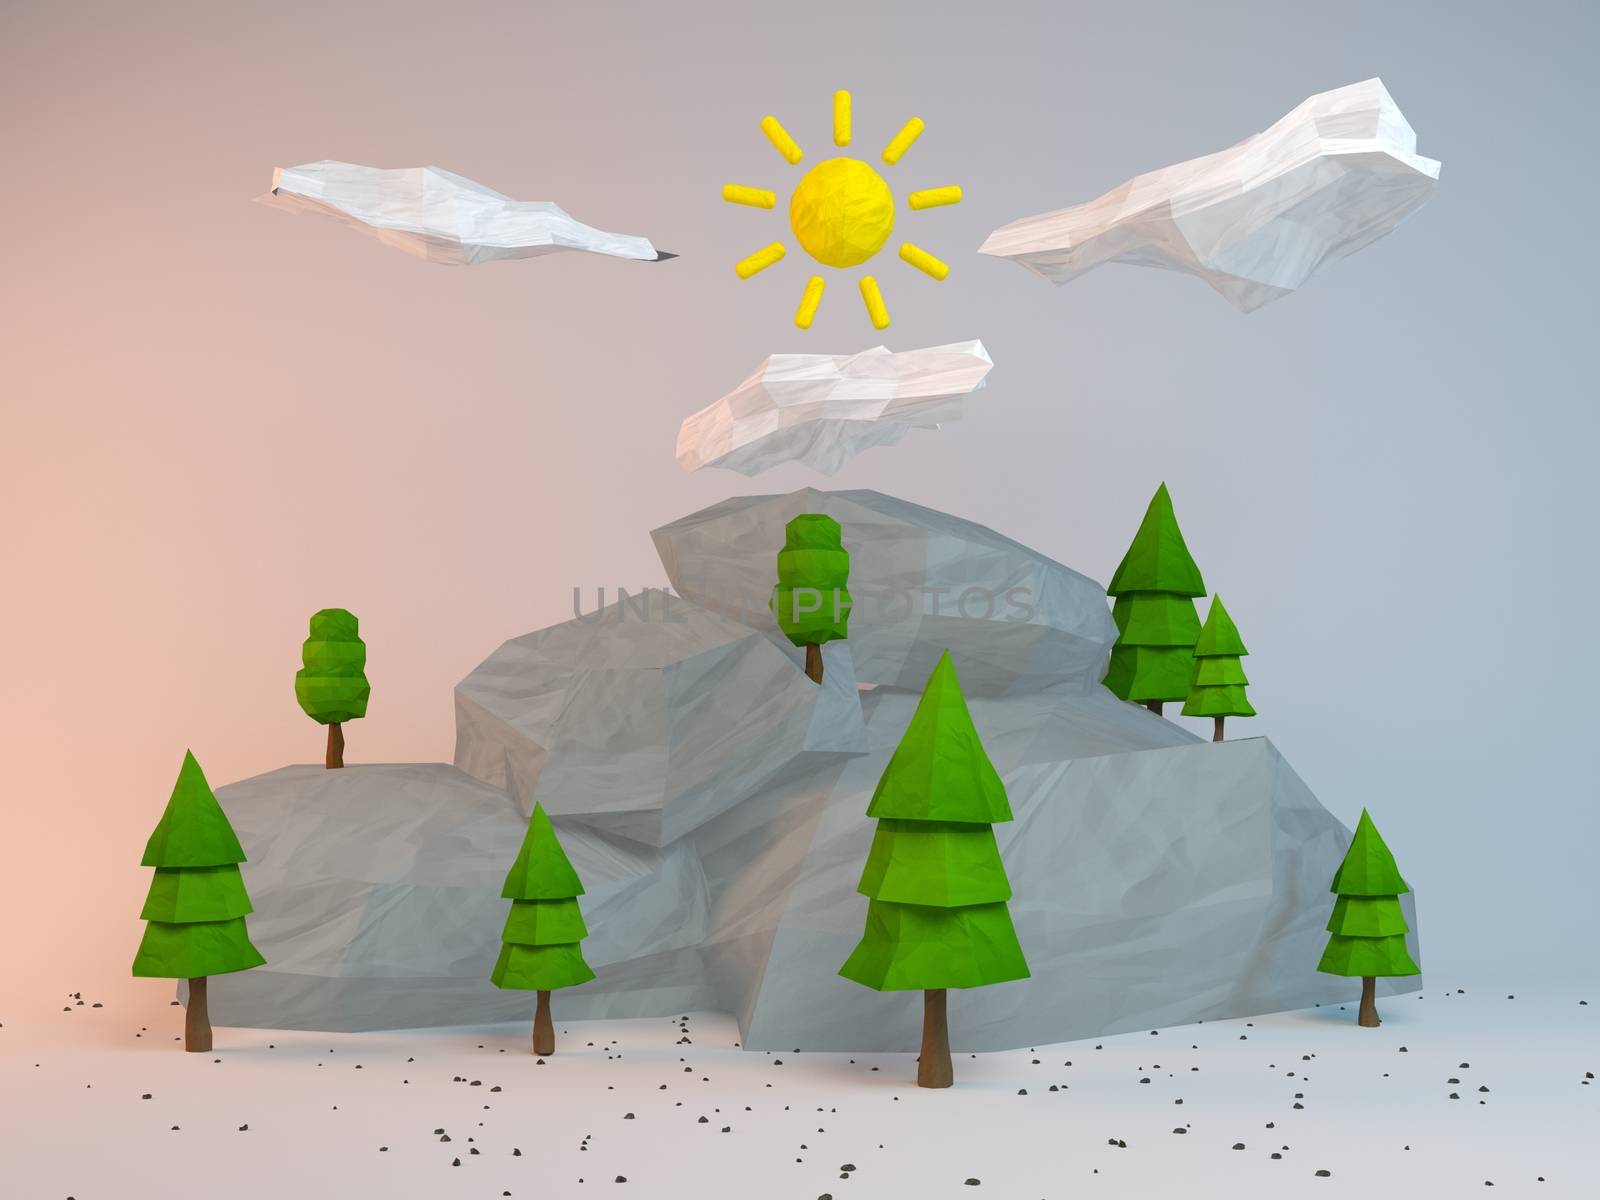 3d rendering of low poly stylized trees and rocks. Objects in the spot of soft light. Colorful cartoon geometric elements with realistic shadows on white background. 